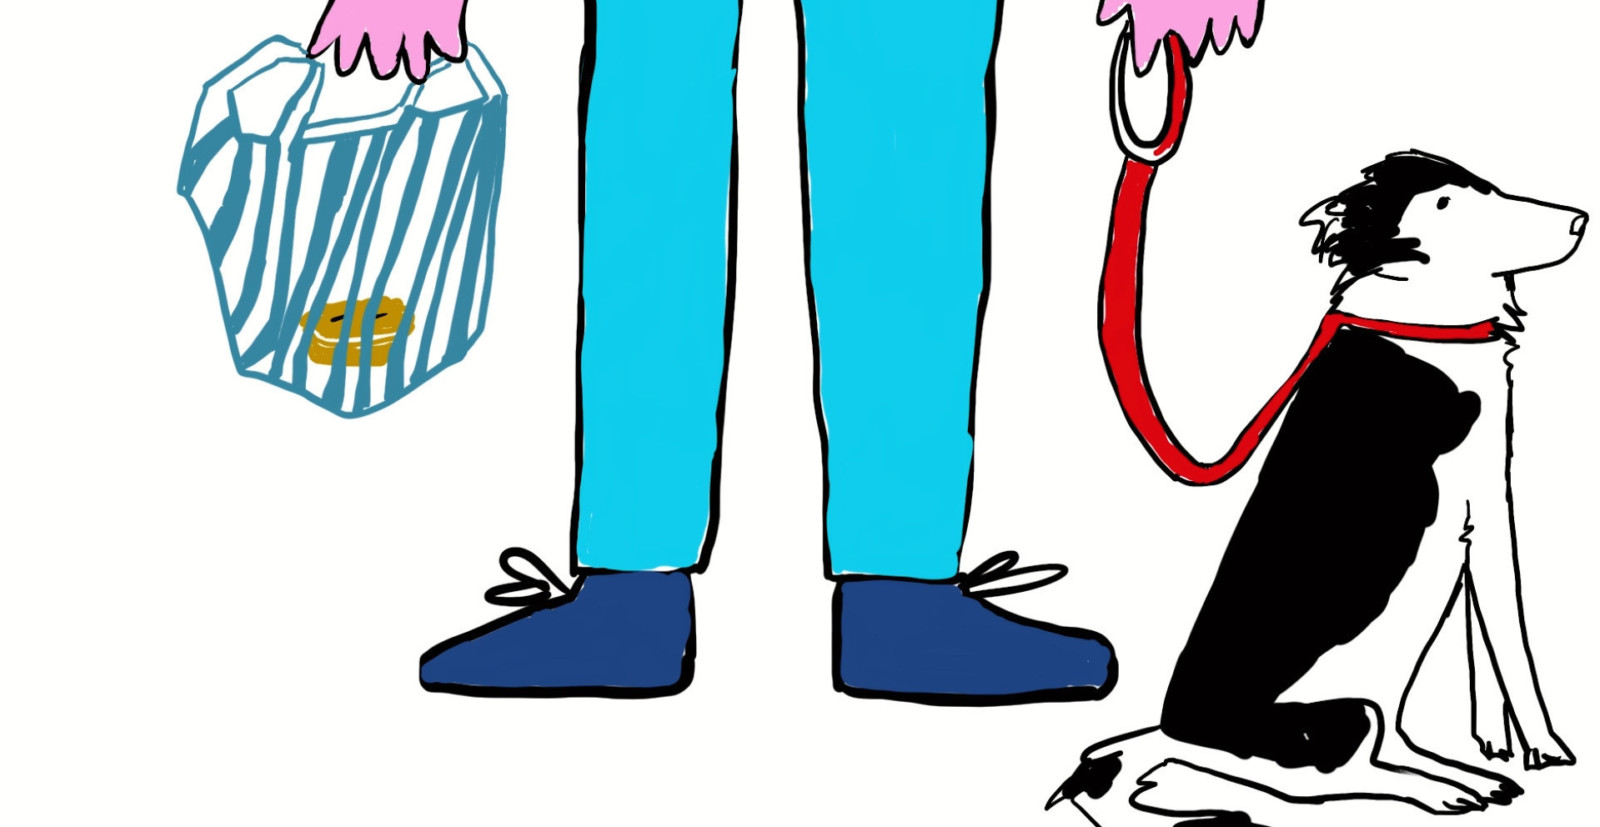 An illustration of the bottom half of a person wearing bright turquoise trousers with dark blue shoes. In their right hand they hold a blue and white striped shopping bag. In their left hand they hold a red lead, which is attached to a black and white dog. At the bottom of the image is a line of text which says: ‘On reflection, I was probably creepy as hell’